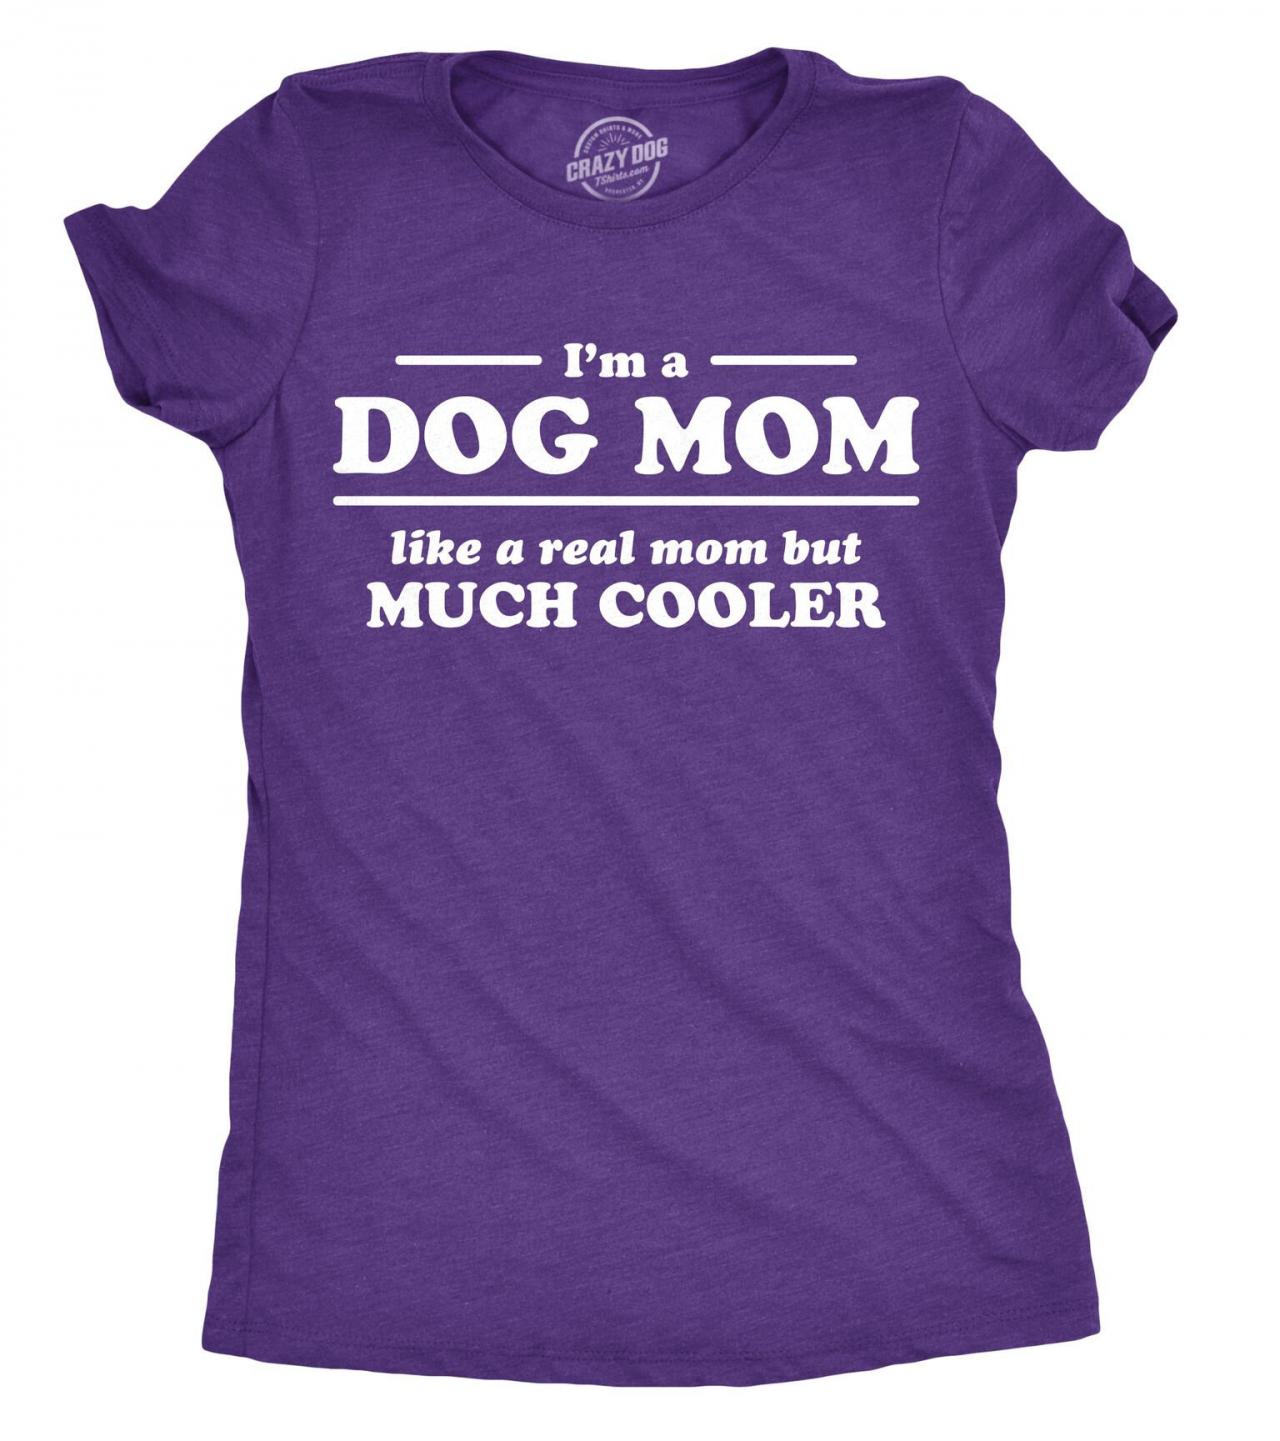 Funny Dog Shirt, Dog Mom Shirt, Womens Dog T shirt, Shirt for Dog Lover, Gift for Dog Owner, Im A Dog Mom Like A Real Mom but Much Cooler